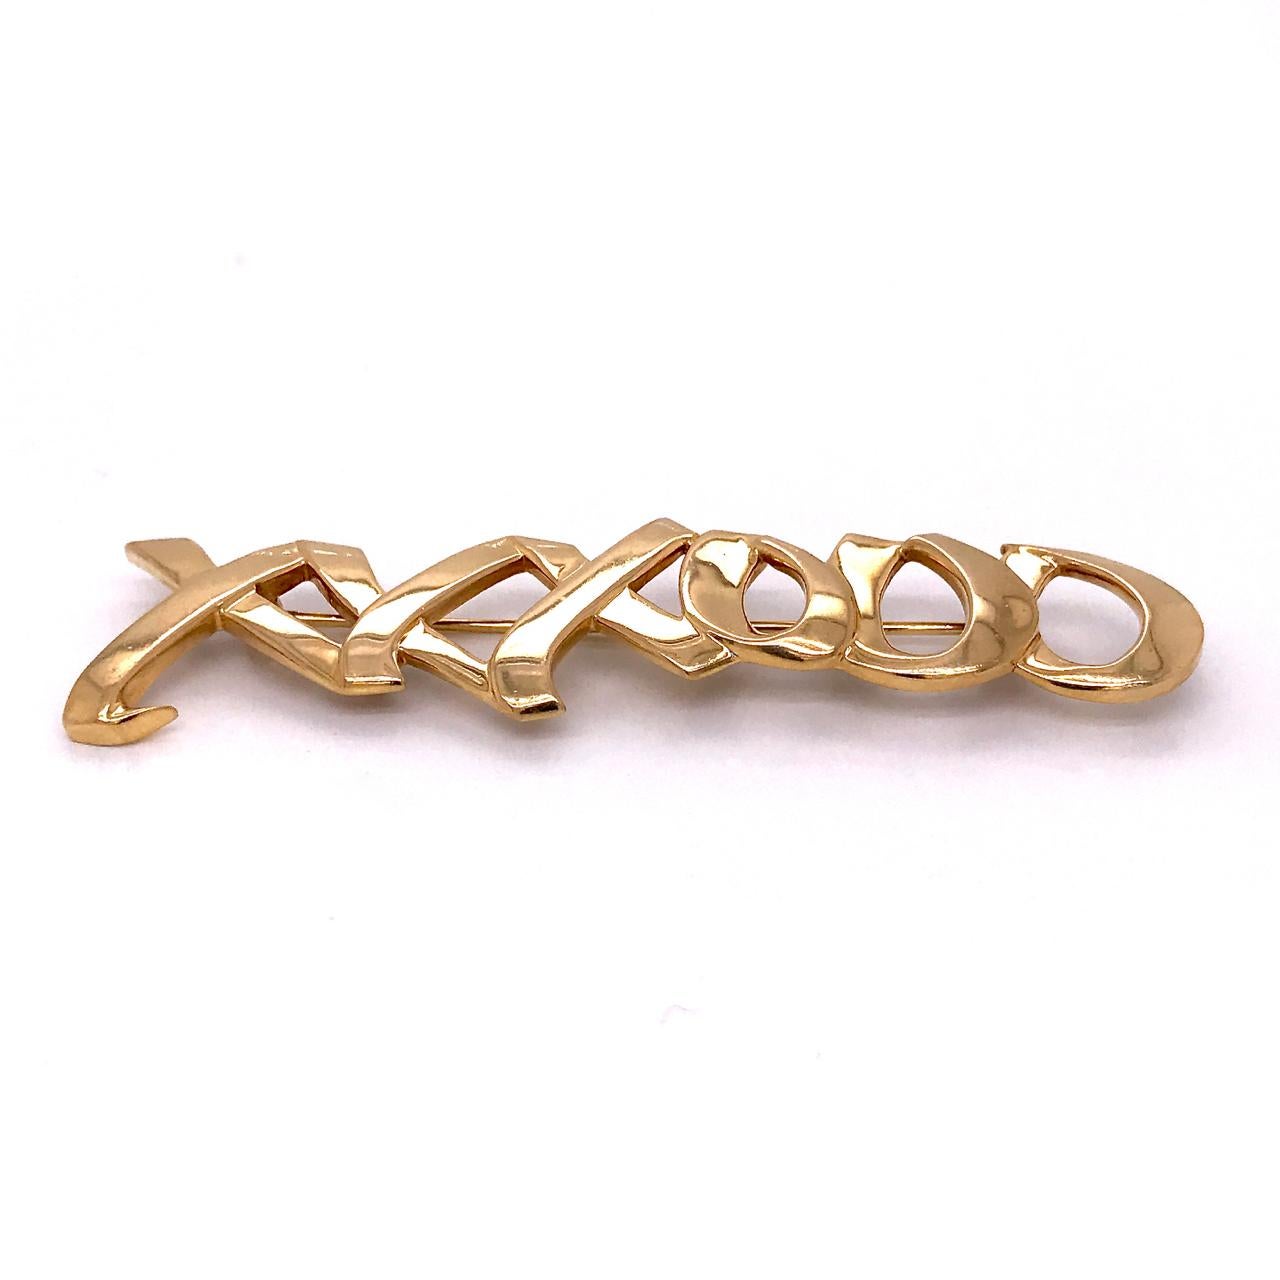 A very fine Graffiti Love & Kisses brooch by Paloma Picasso for Tiffany & Co.

In 18k yellow gold with the XXXOOO love and kisses motif.

Simply top shelf design by the world's premier retailer!

Marked 750 for 18k gold fineness, Tiffany & Co., and